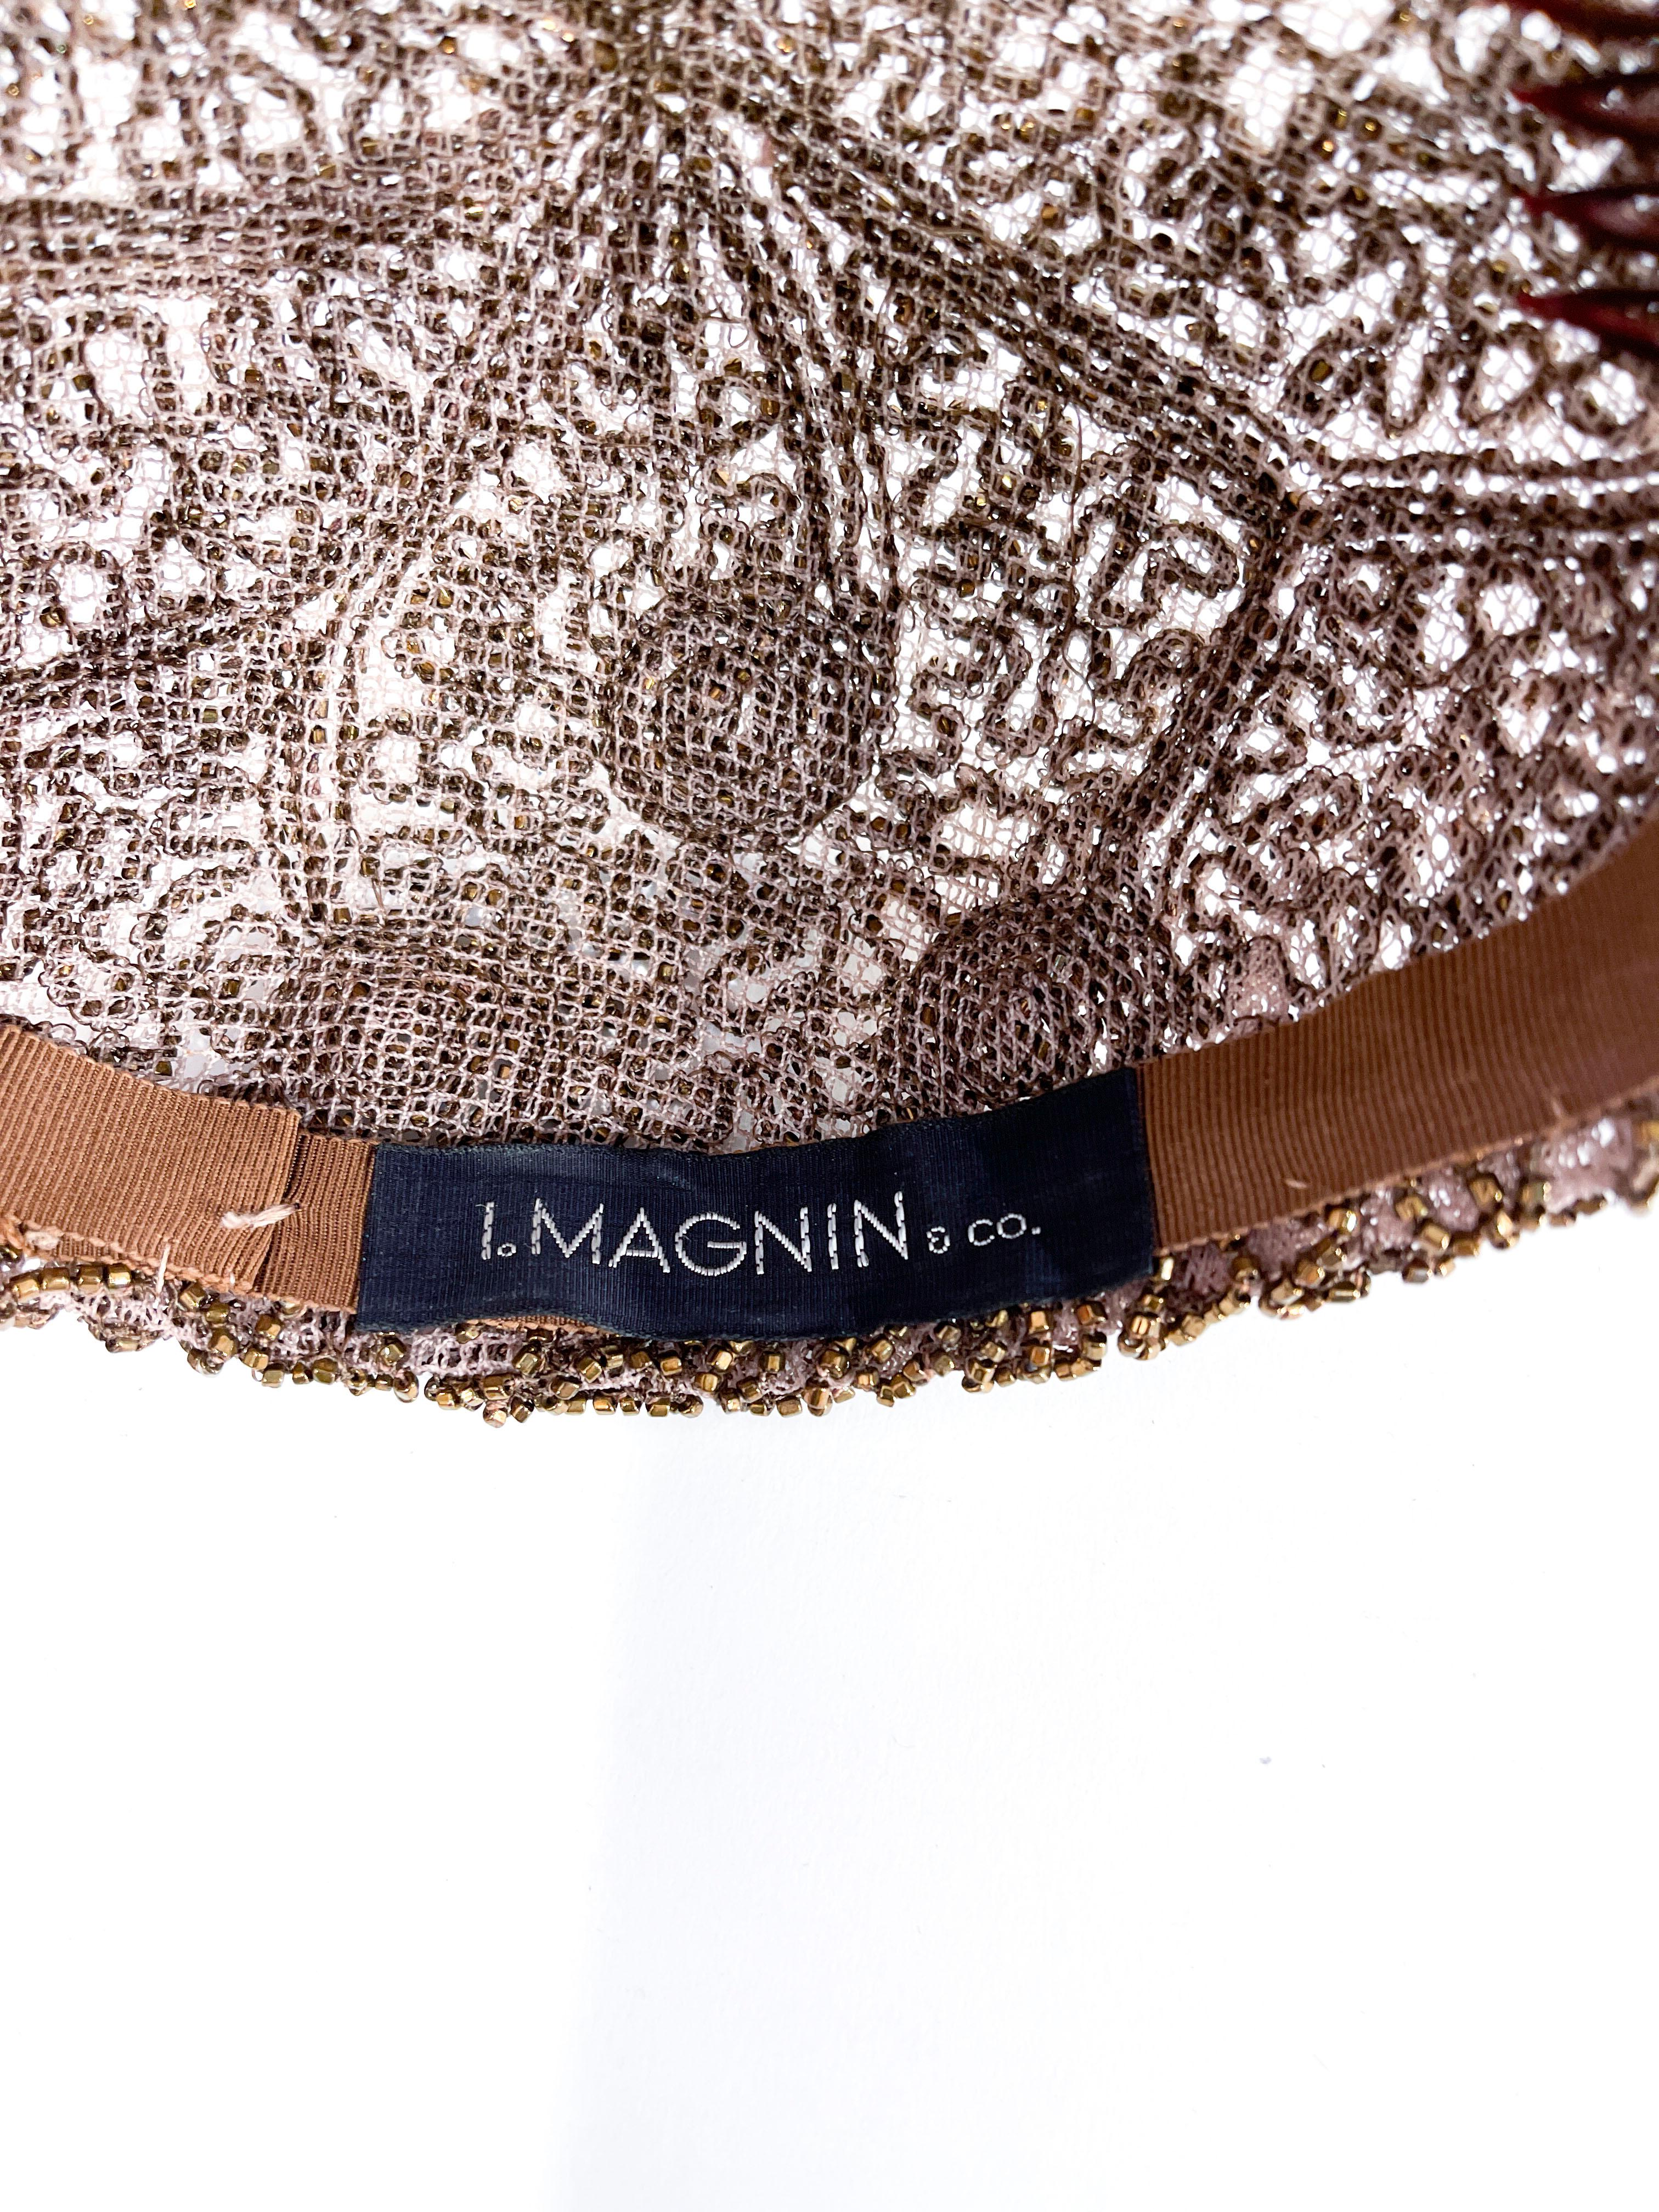 1950s I. Magnin Copper Beaded Cocktail Hat In Good Condition For Sale In San Francisco, CA